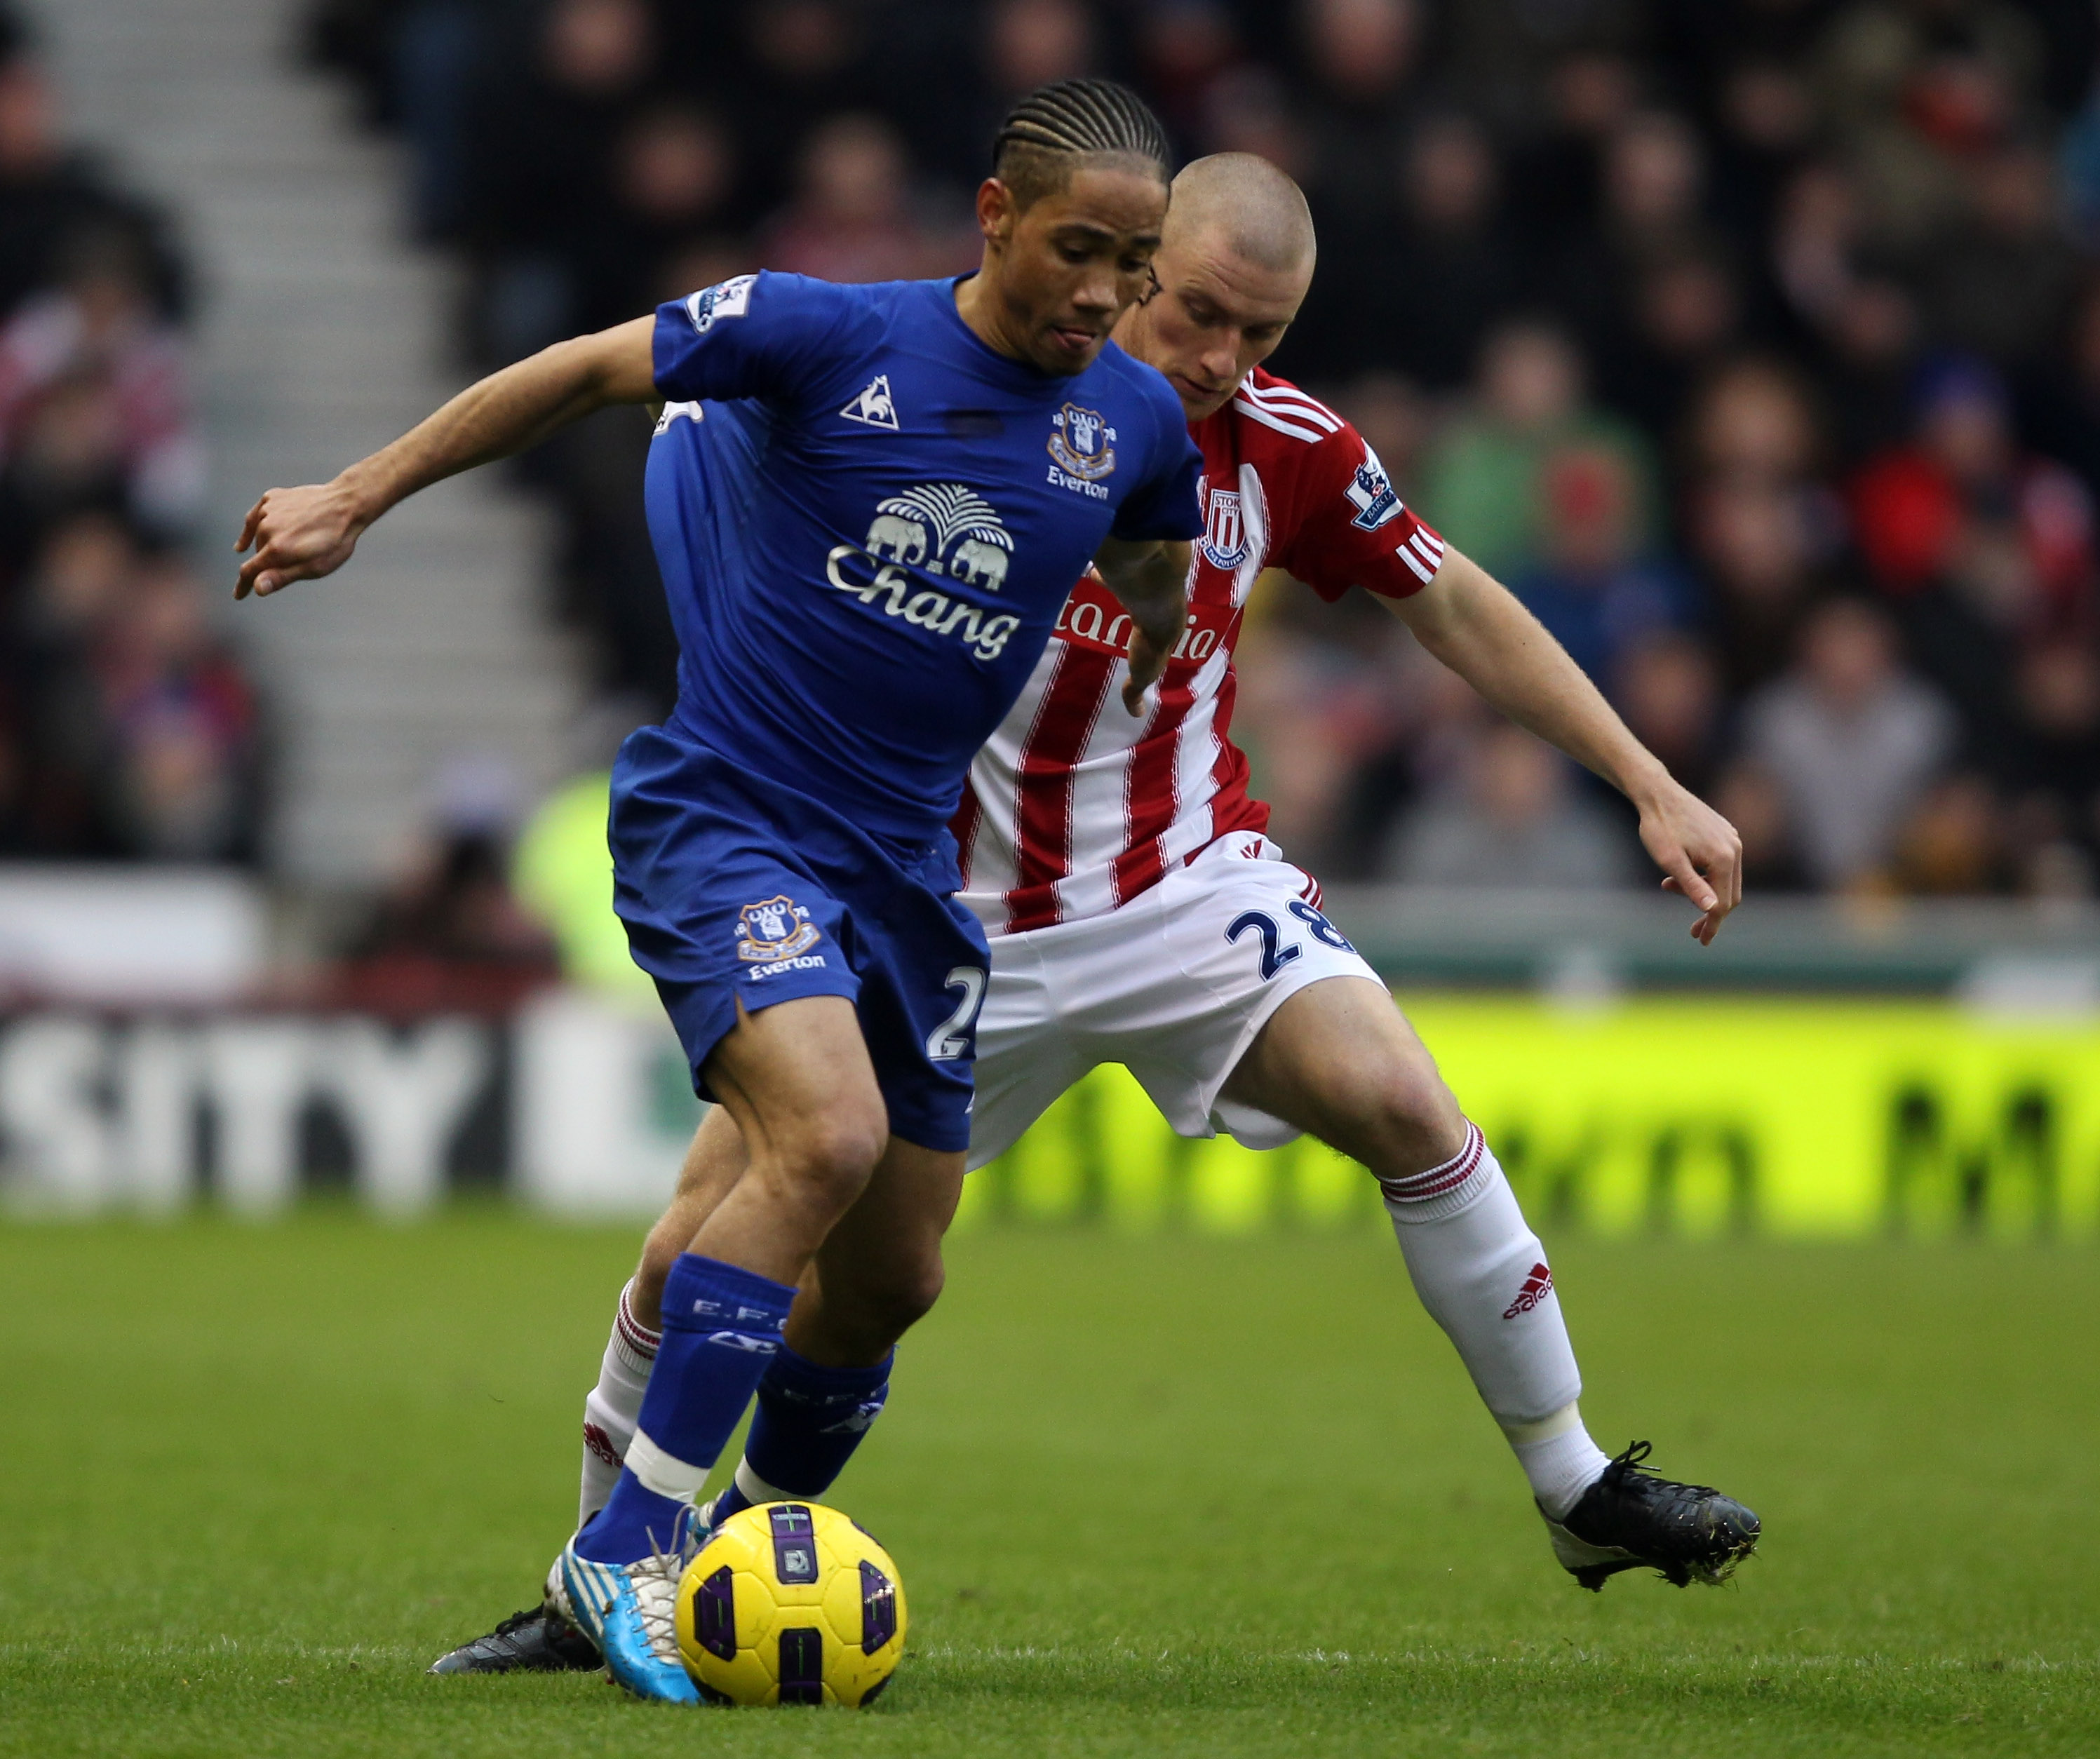 STOKE ON TRENT, ENGLAND - JANUARY 01:  Andy Wilkinson of Stoke is challenged by Steven Pienaar of Everton during the Barclays Premier League match between Stoke City and Everton at the Britannia Stadium on January 1, 2011 in Stoke on Trent, England.  (Pho